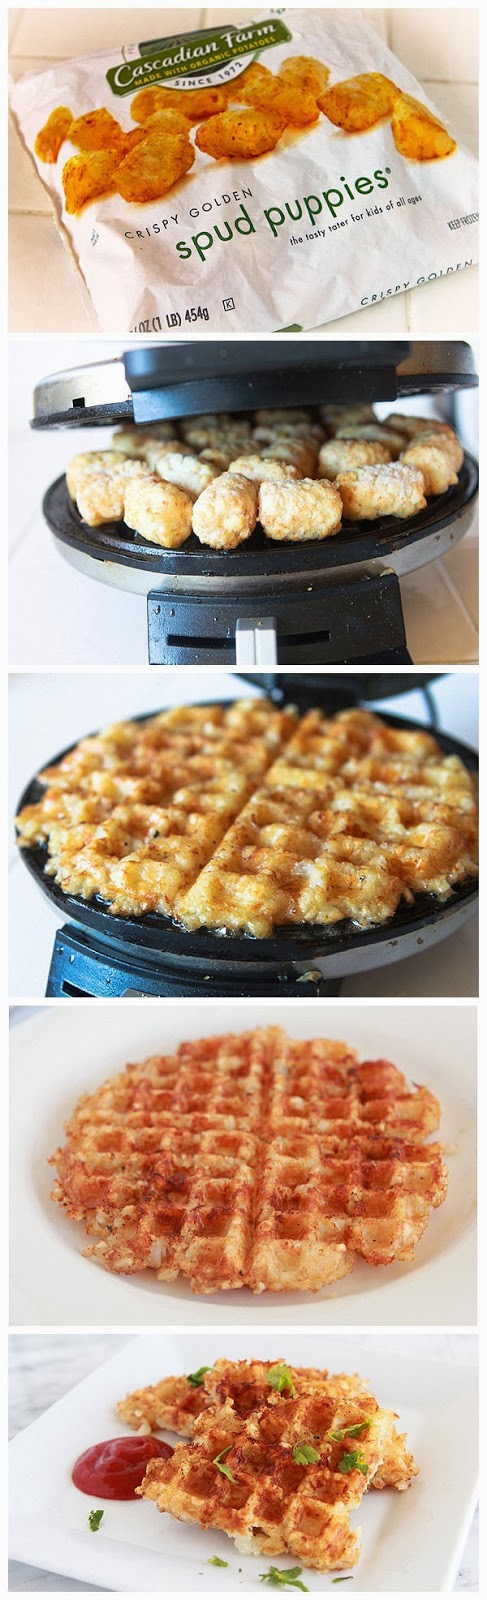 15 Breakfast Hacks That Will Transform Your Mornings 10